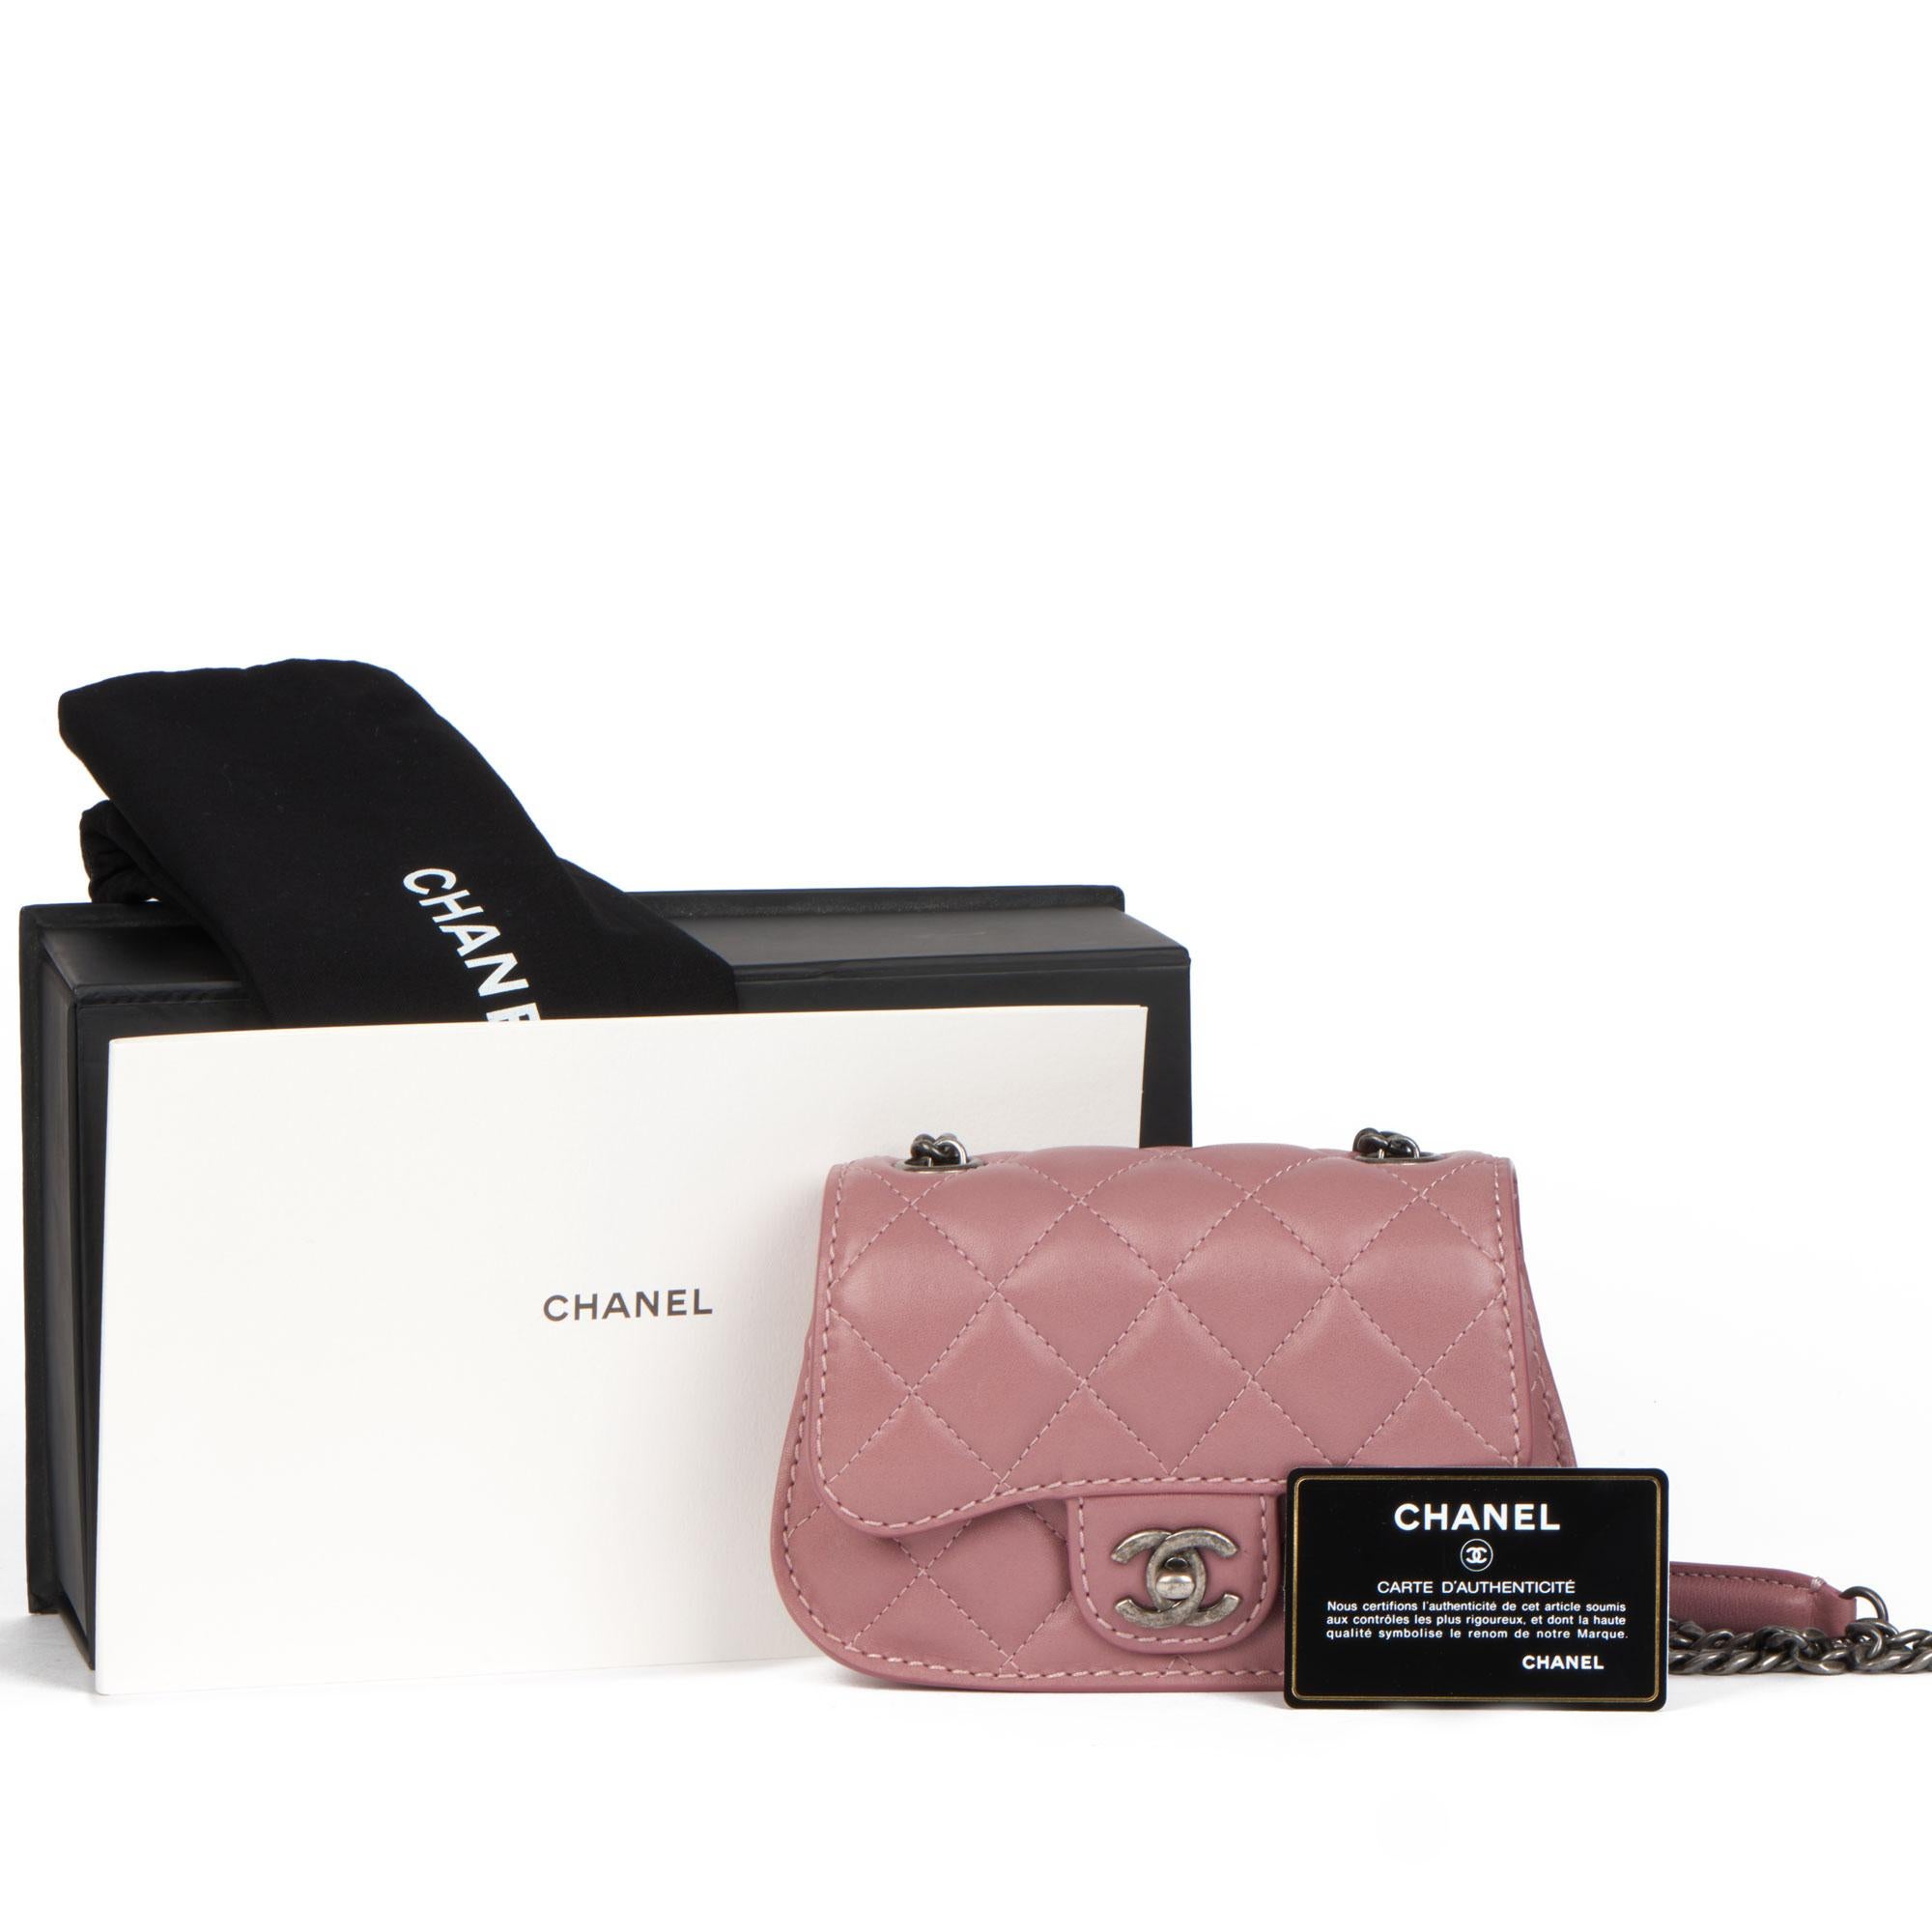 Chanel MAUVE QUILTED LAMBSKIN MINI FLAP BAG 4